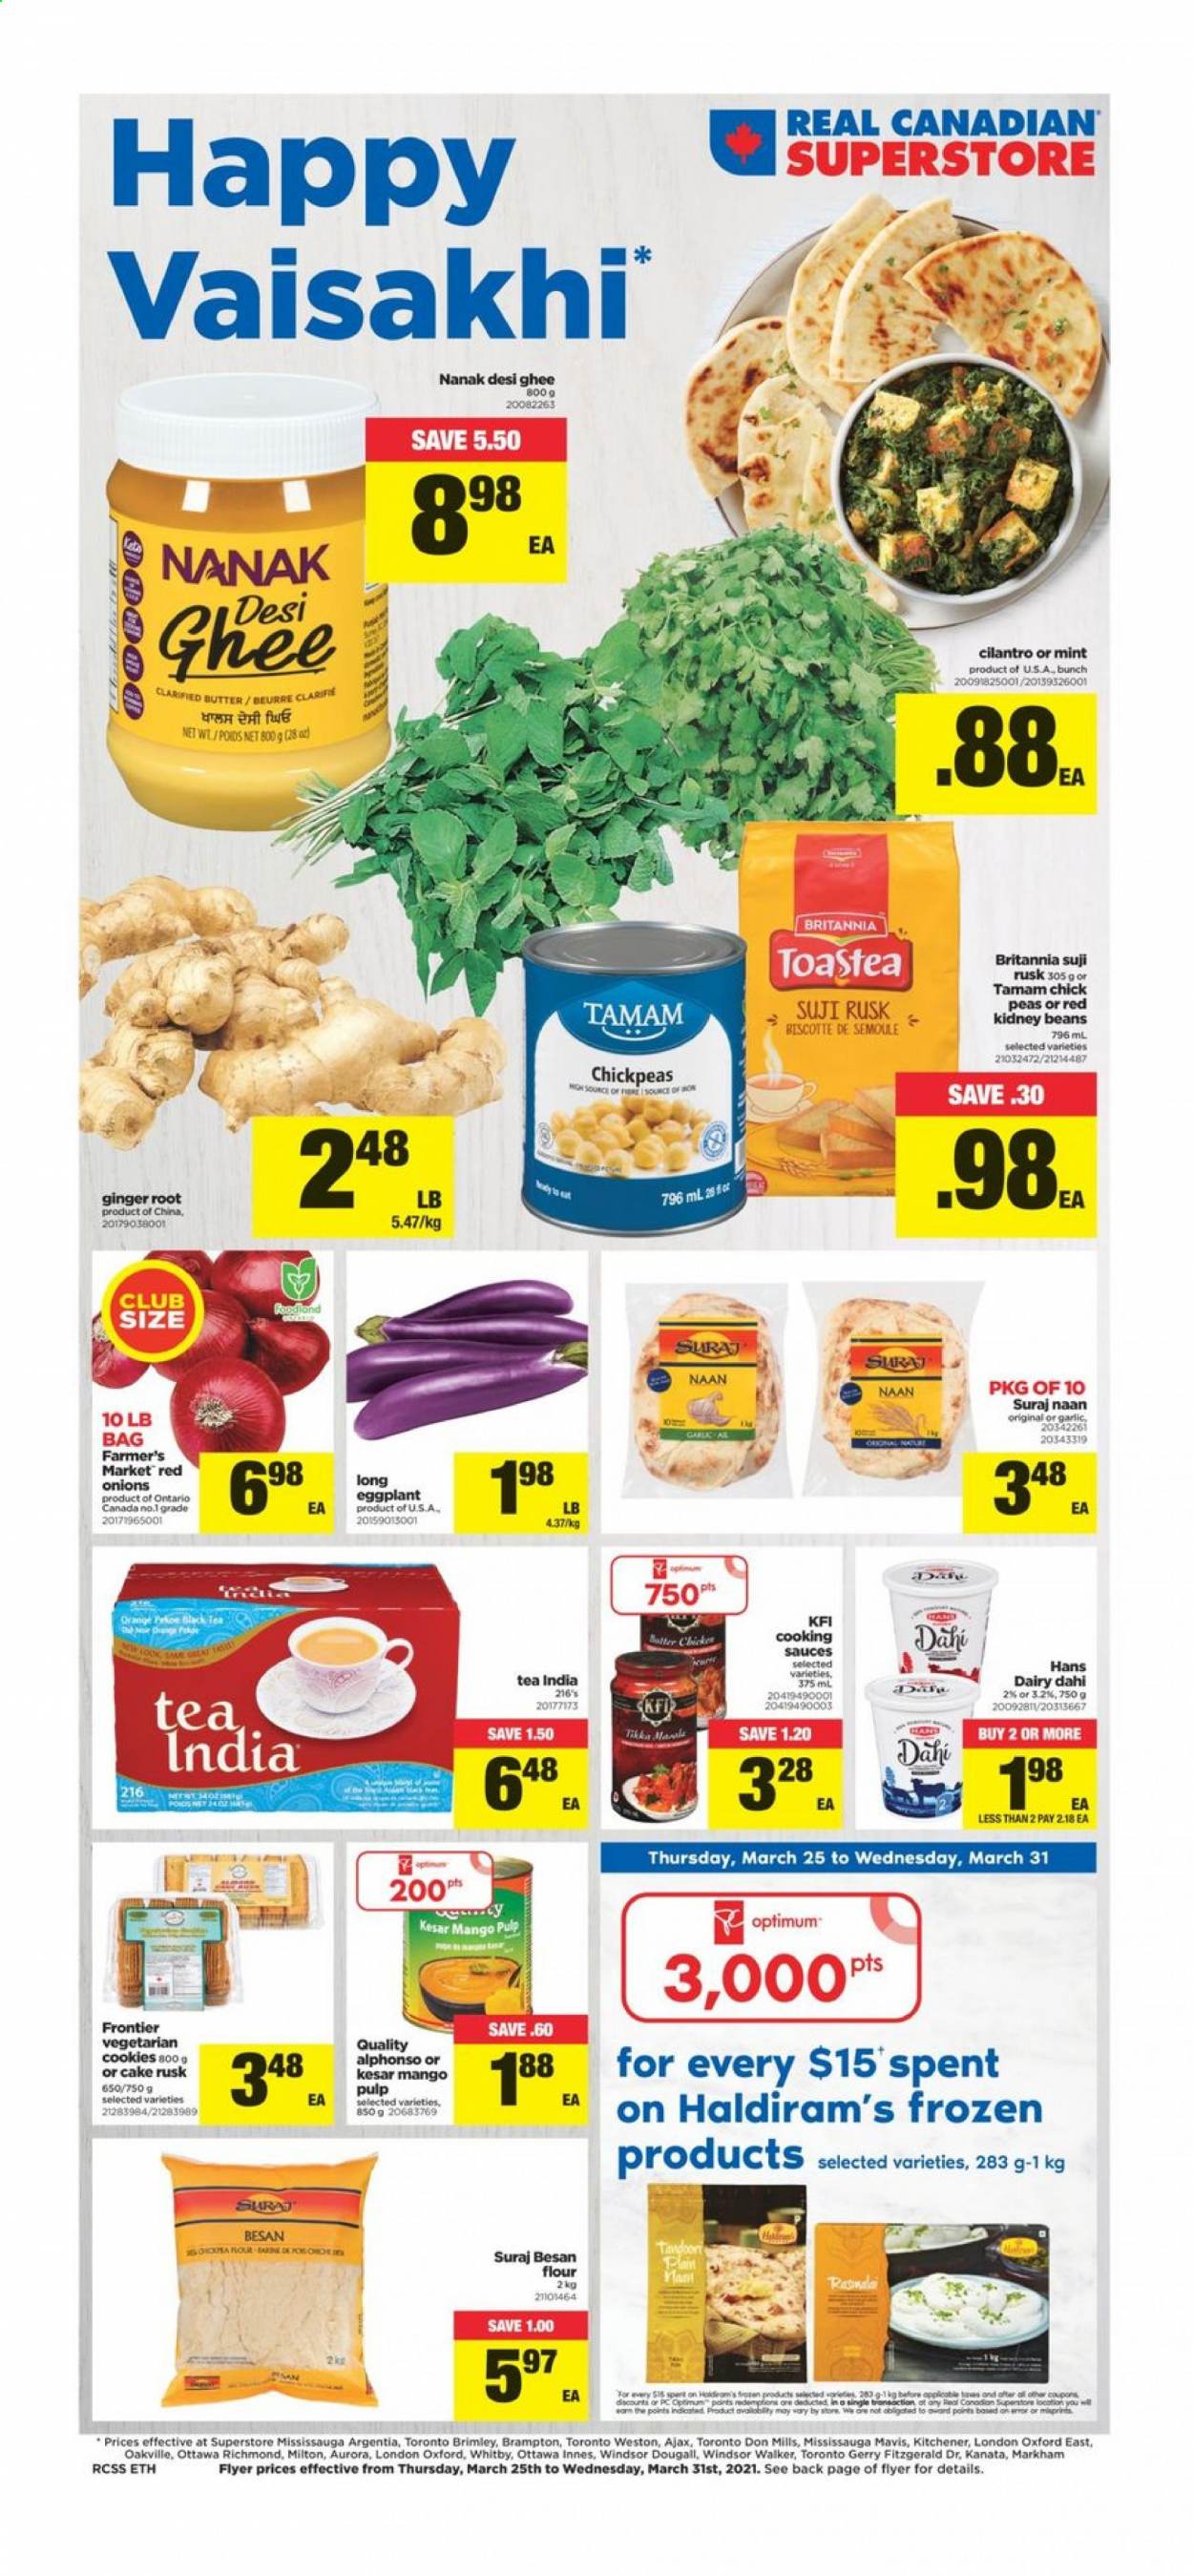 thumbnail - Real Canadian Superstore Flyer - March 25, 2021 - March 31, 2021 - Sales products - cake, rusks, beans, garlic, ginger, red onions, peas, onion, eggplant, mango, butter, ghee, cookies, flour, gram flour, kidney beans, chickpeas, cilantro, tea, Ajax, Optimum. Page 1.